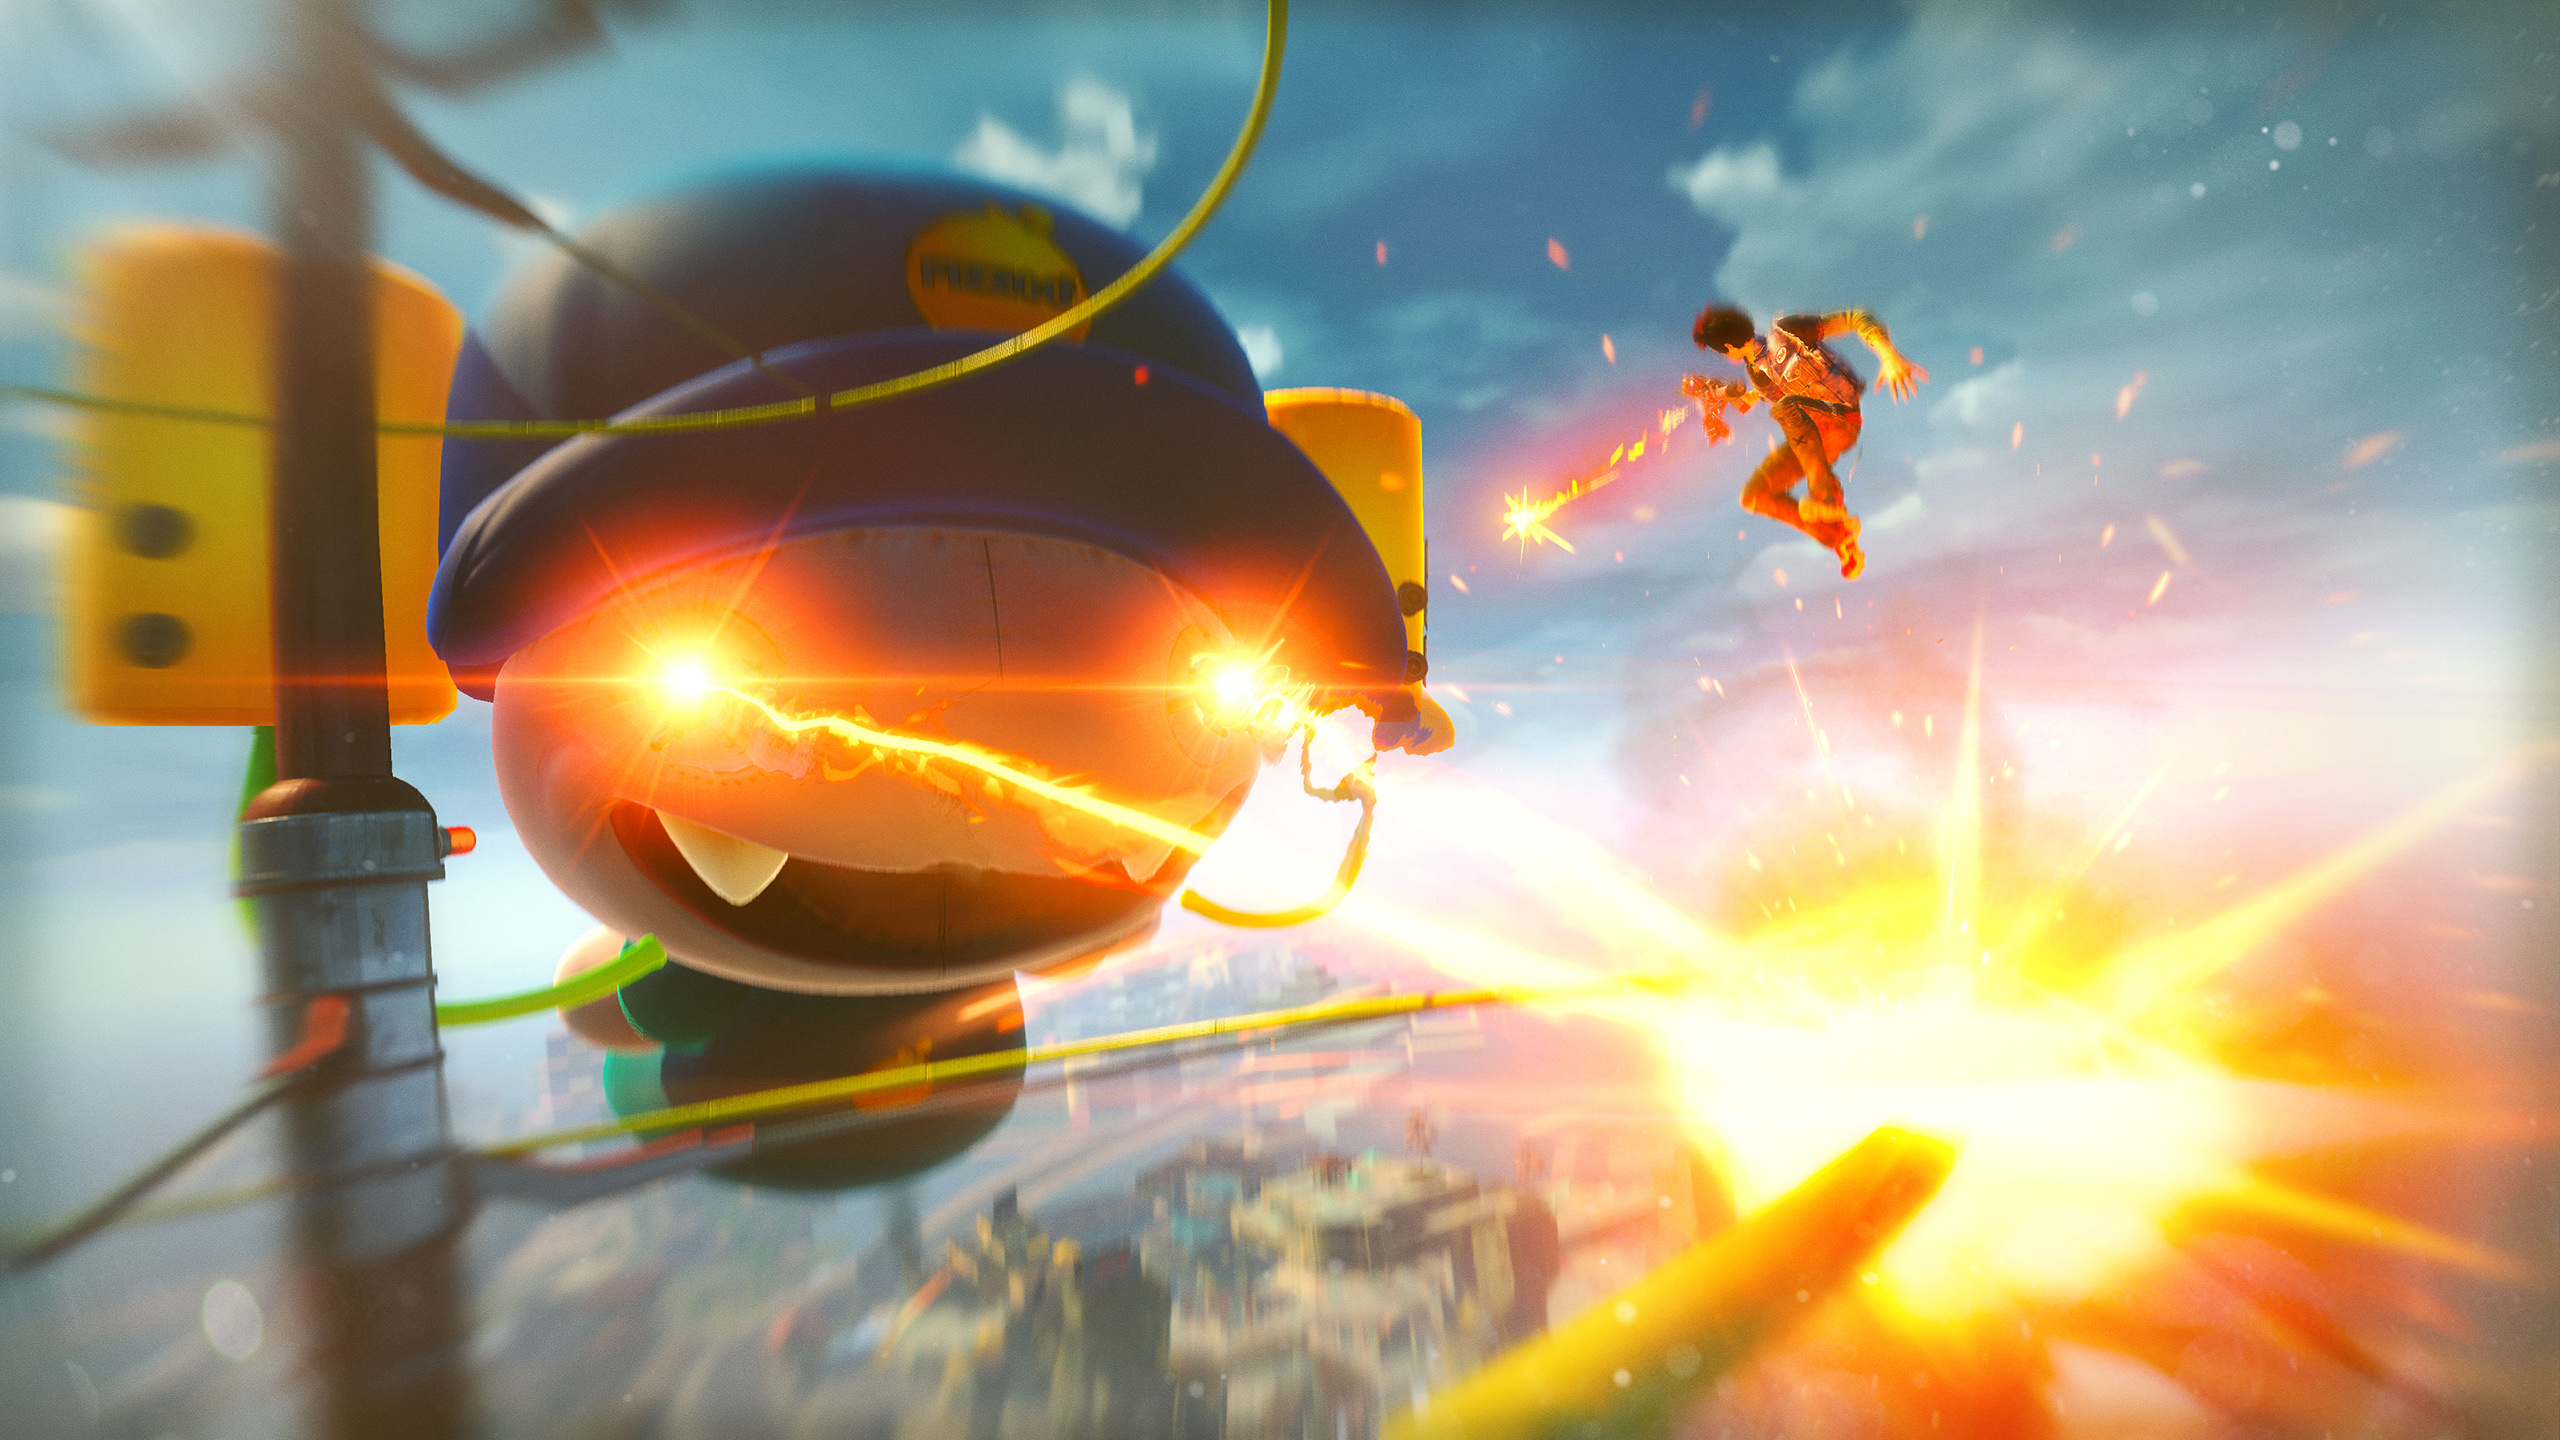 Our First Real Look At Sunset Overdrive